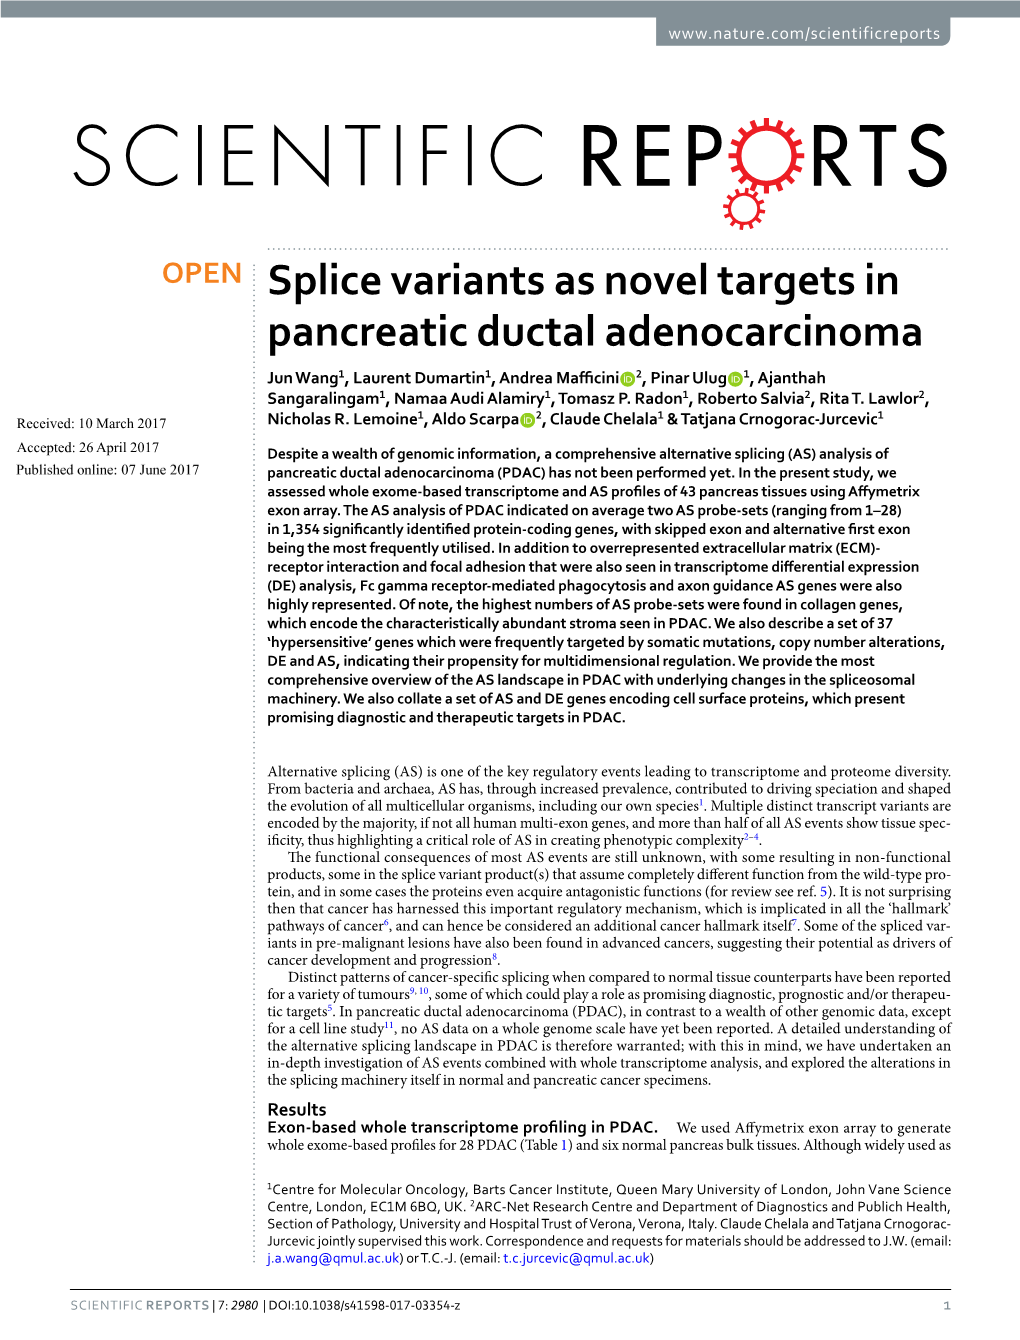 Splice Variants As Novel Targets in Pancreatic Ductal Adenocarcinoma